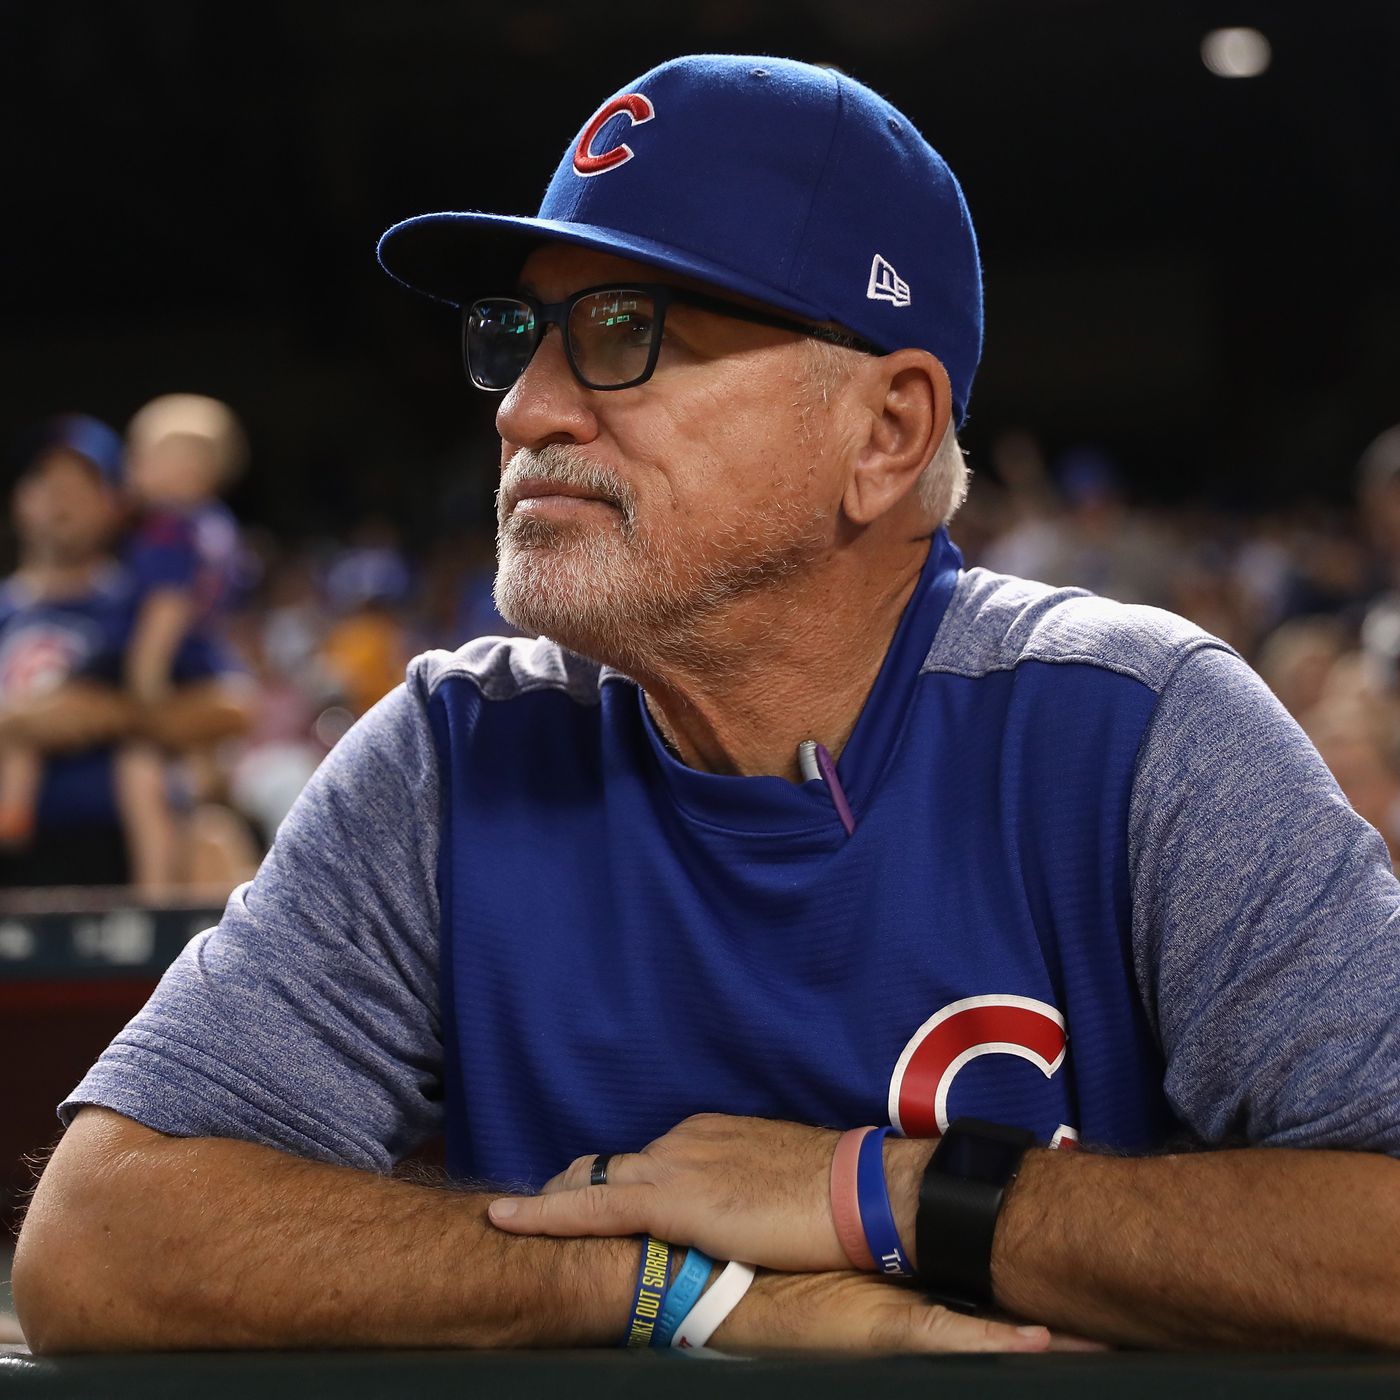 Former Rays' manager Joe Maddon to donate $25,000 to hurricane